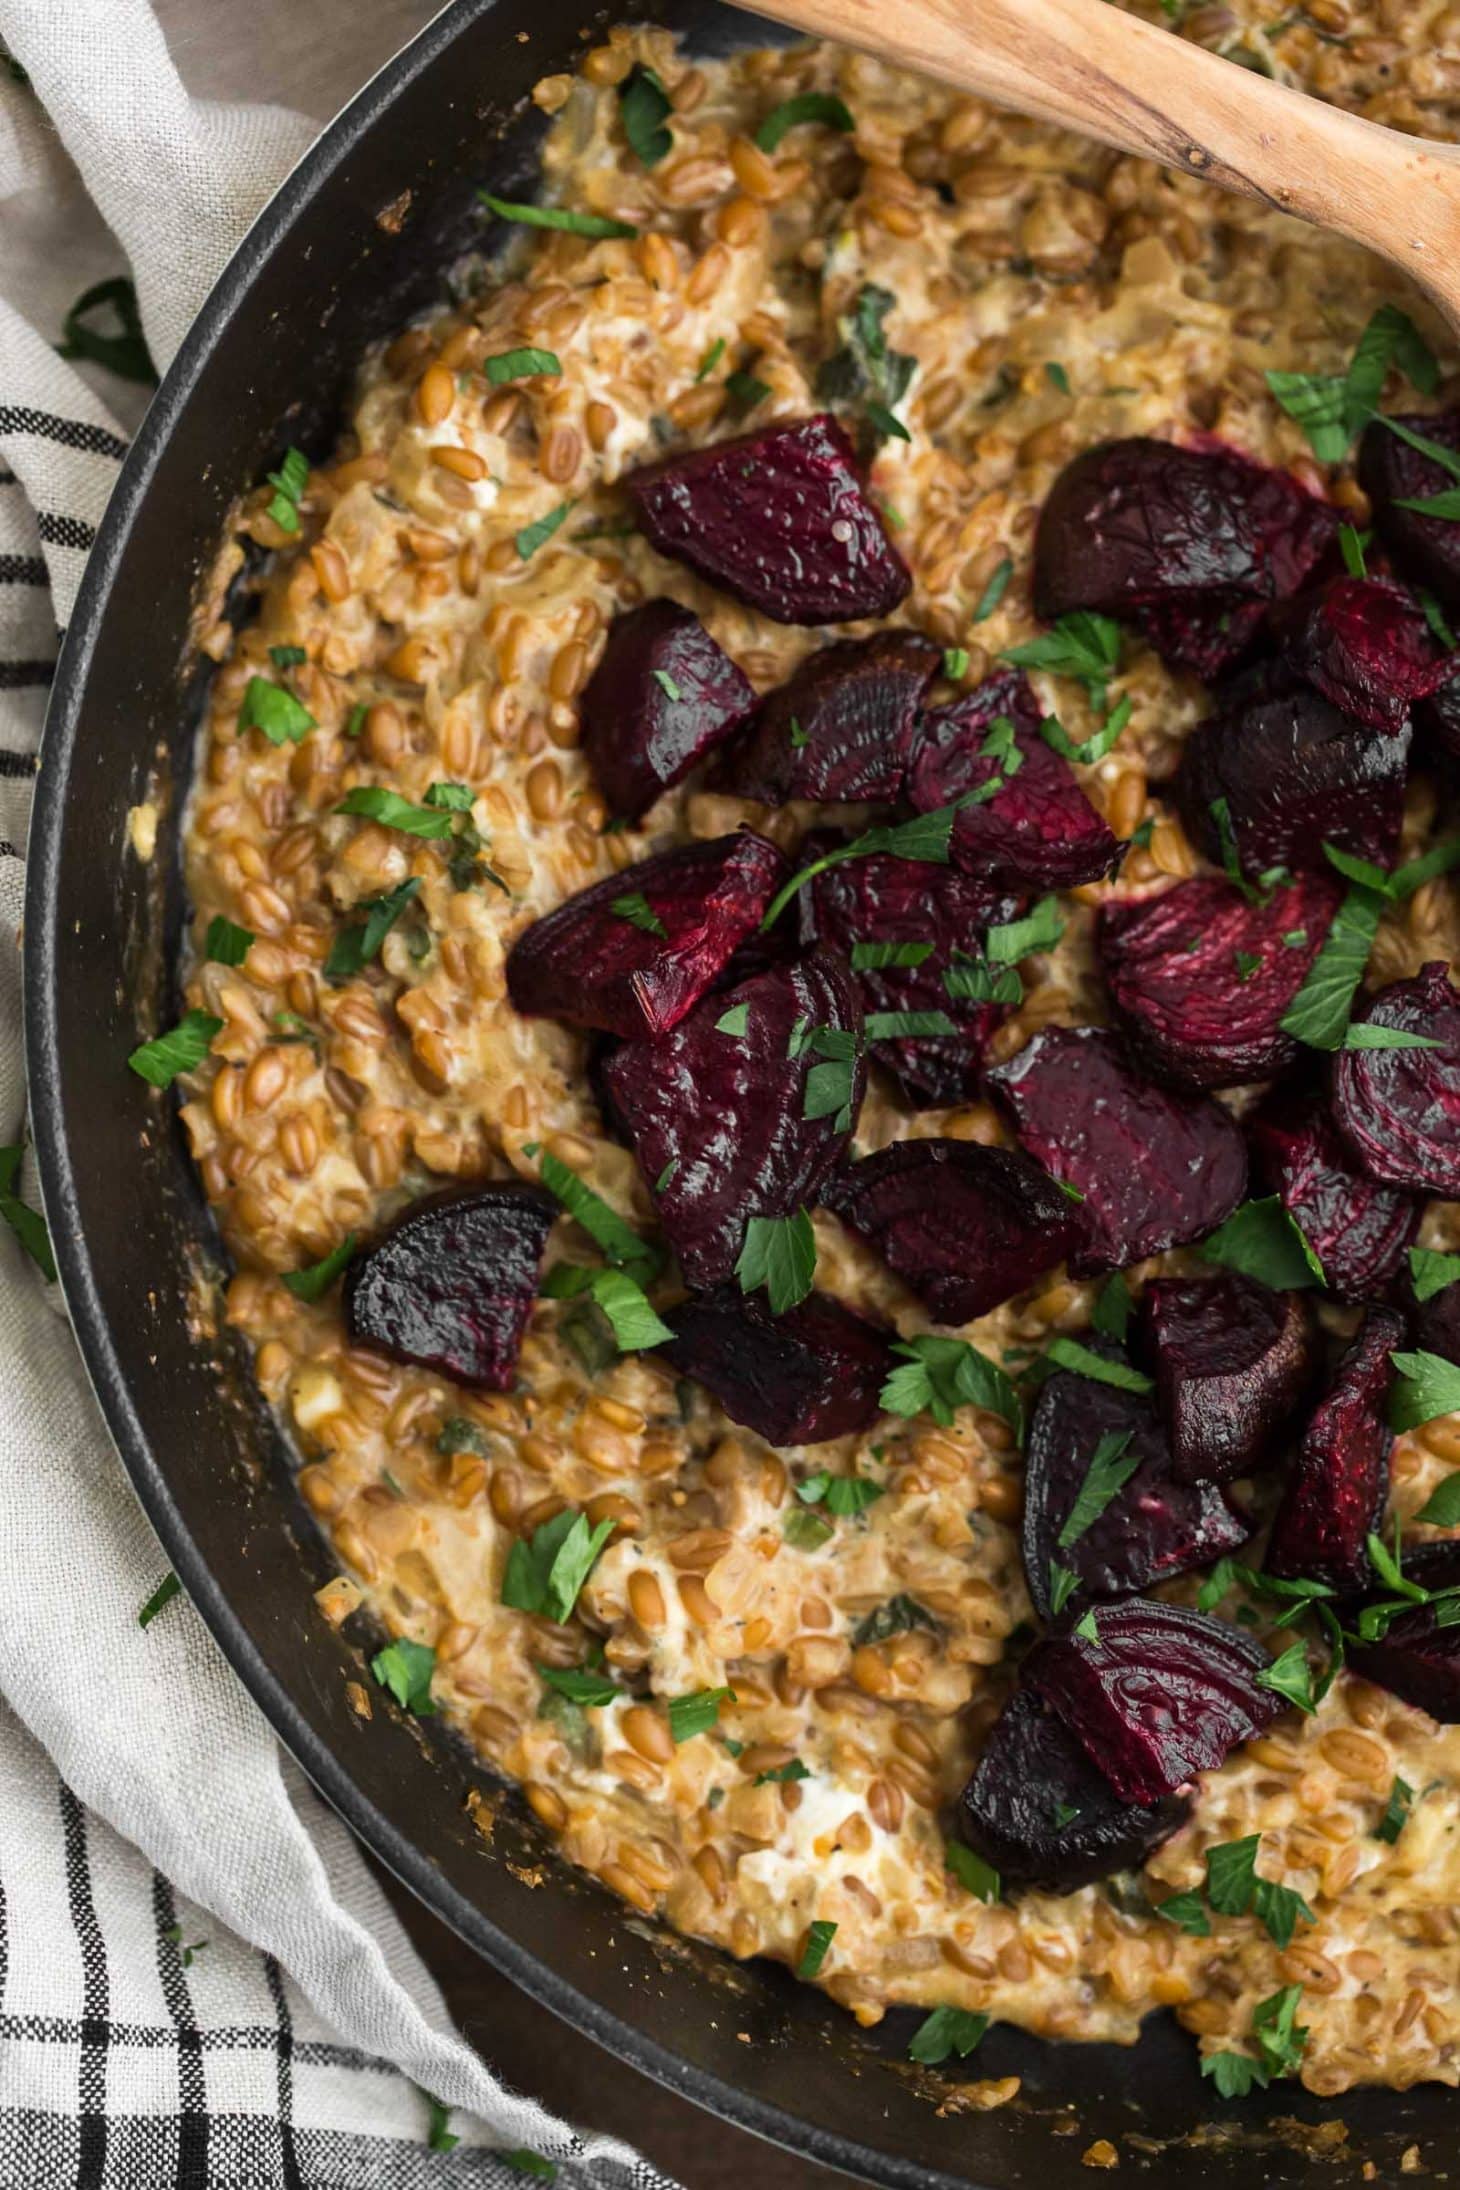 Cracked Spelt Risotto with Roasted Beets